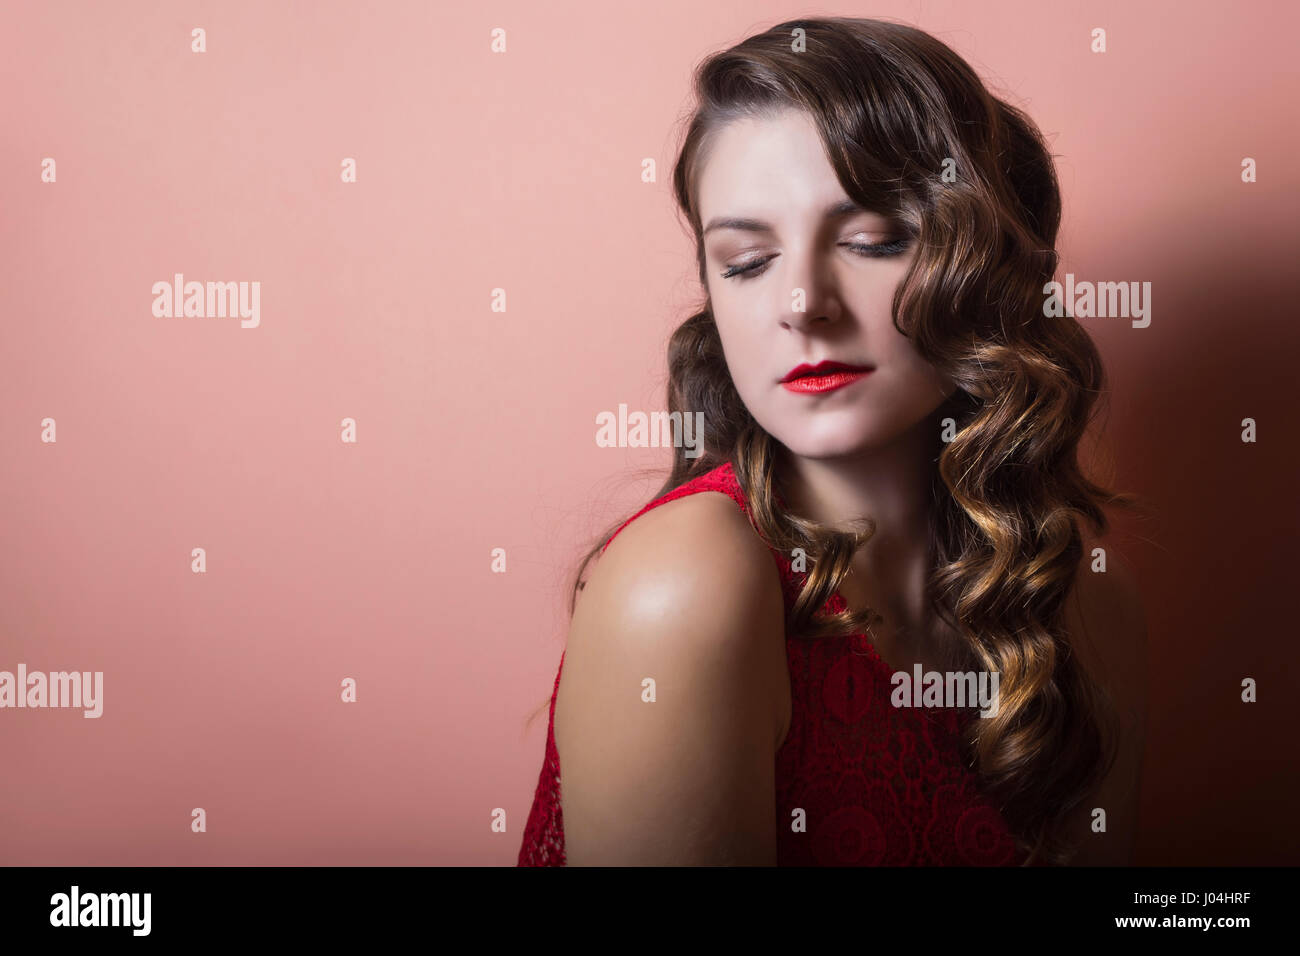 Beautiful brunette model with elegant hairstyle and red lips Stock Photo